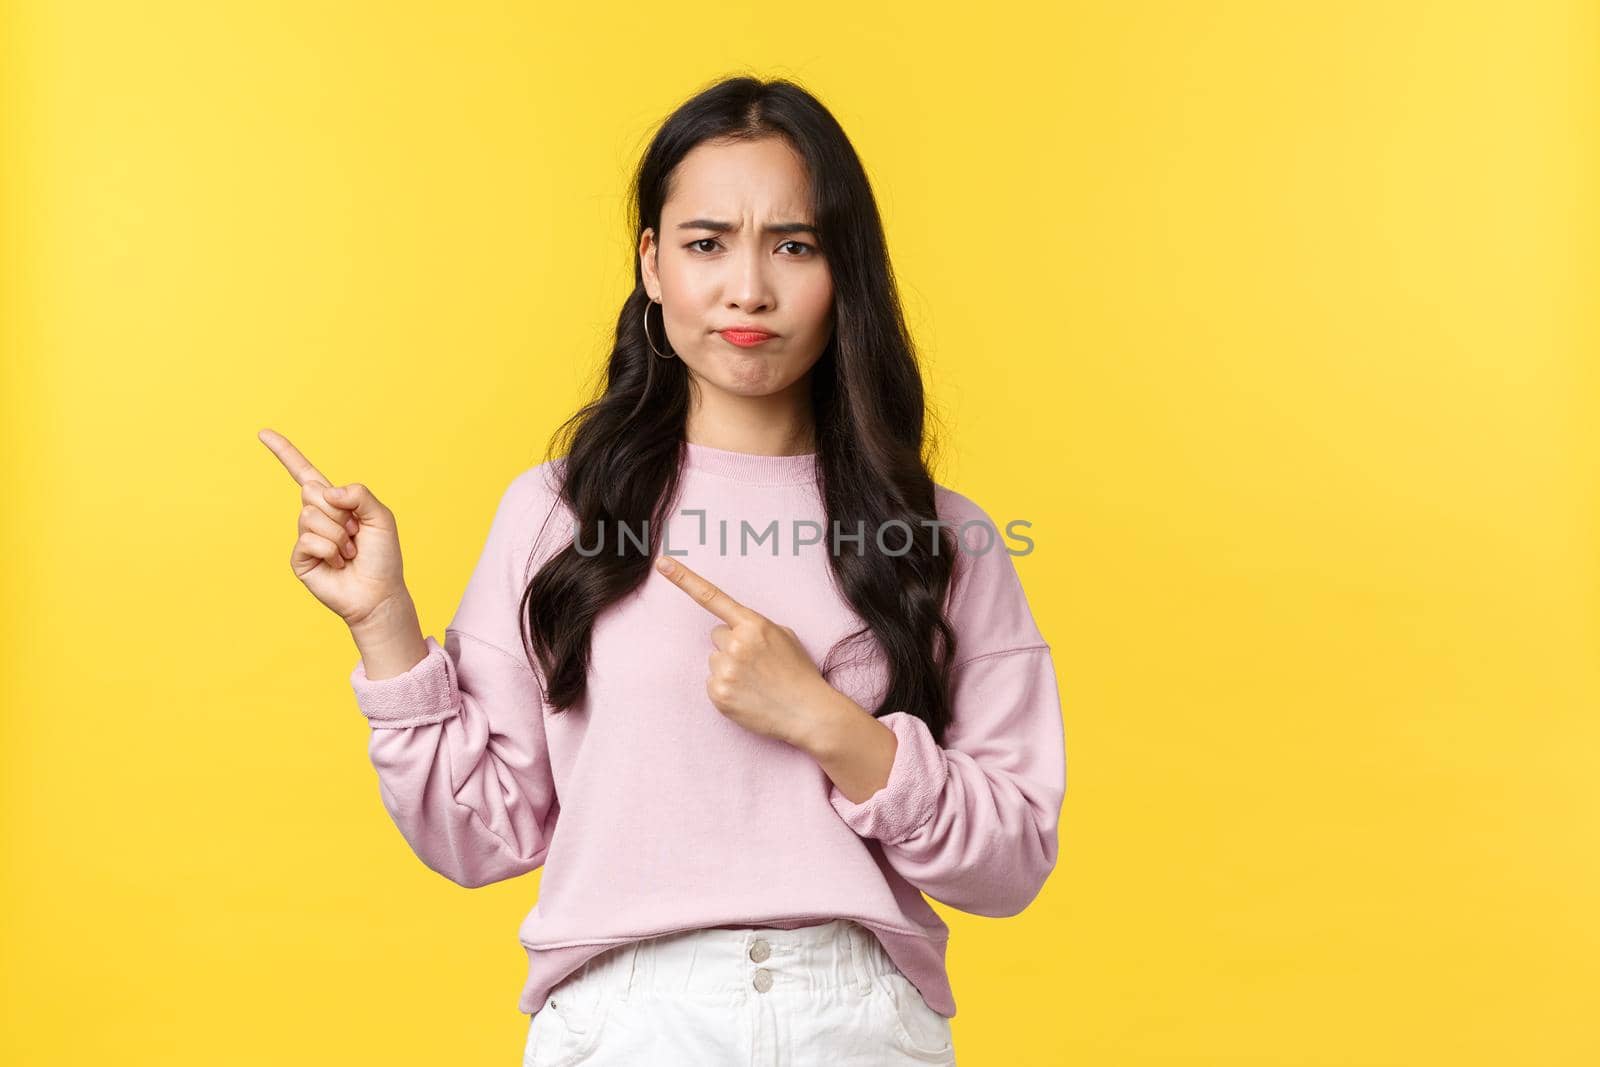 People emotions, lifestyle concept. Doubtful and indecisive cute asian girl looking puzzled, pouting and frowning as pointing upper left corner, asking question about banner, yellow background.